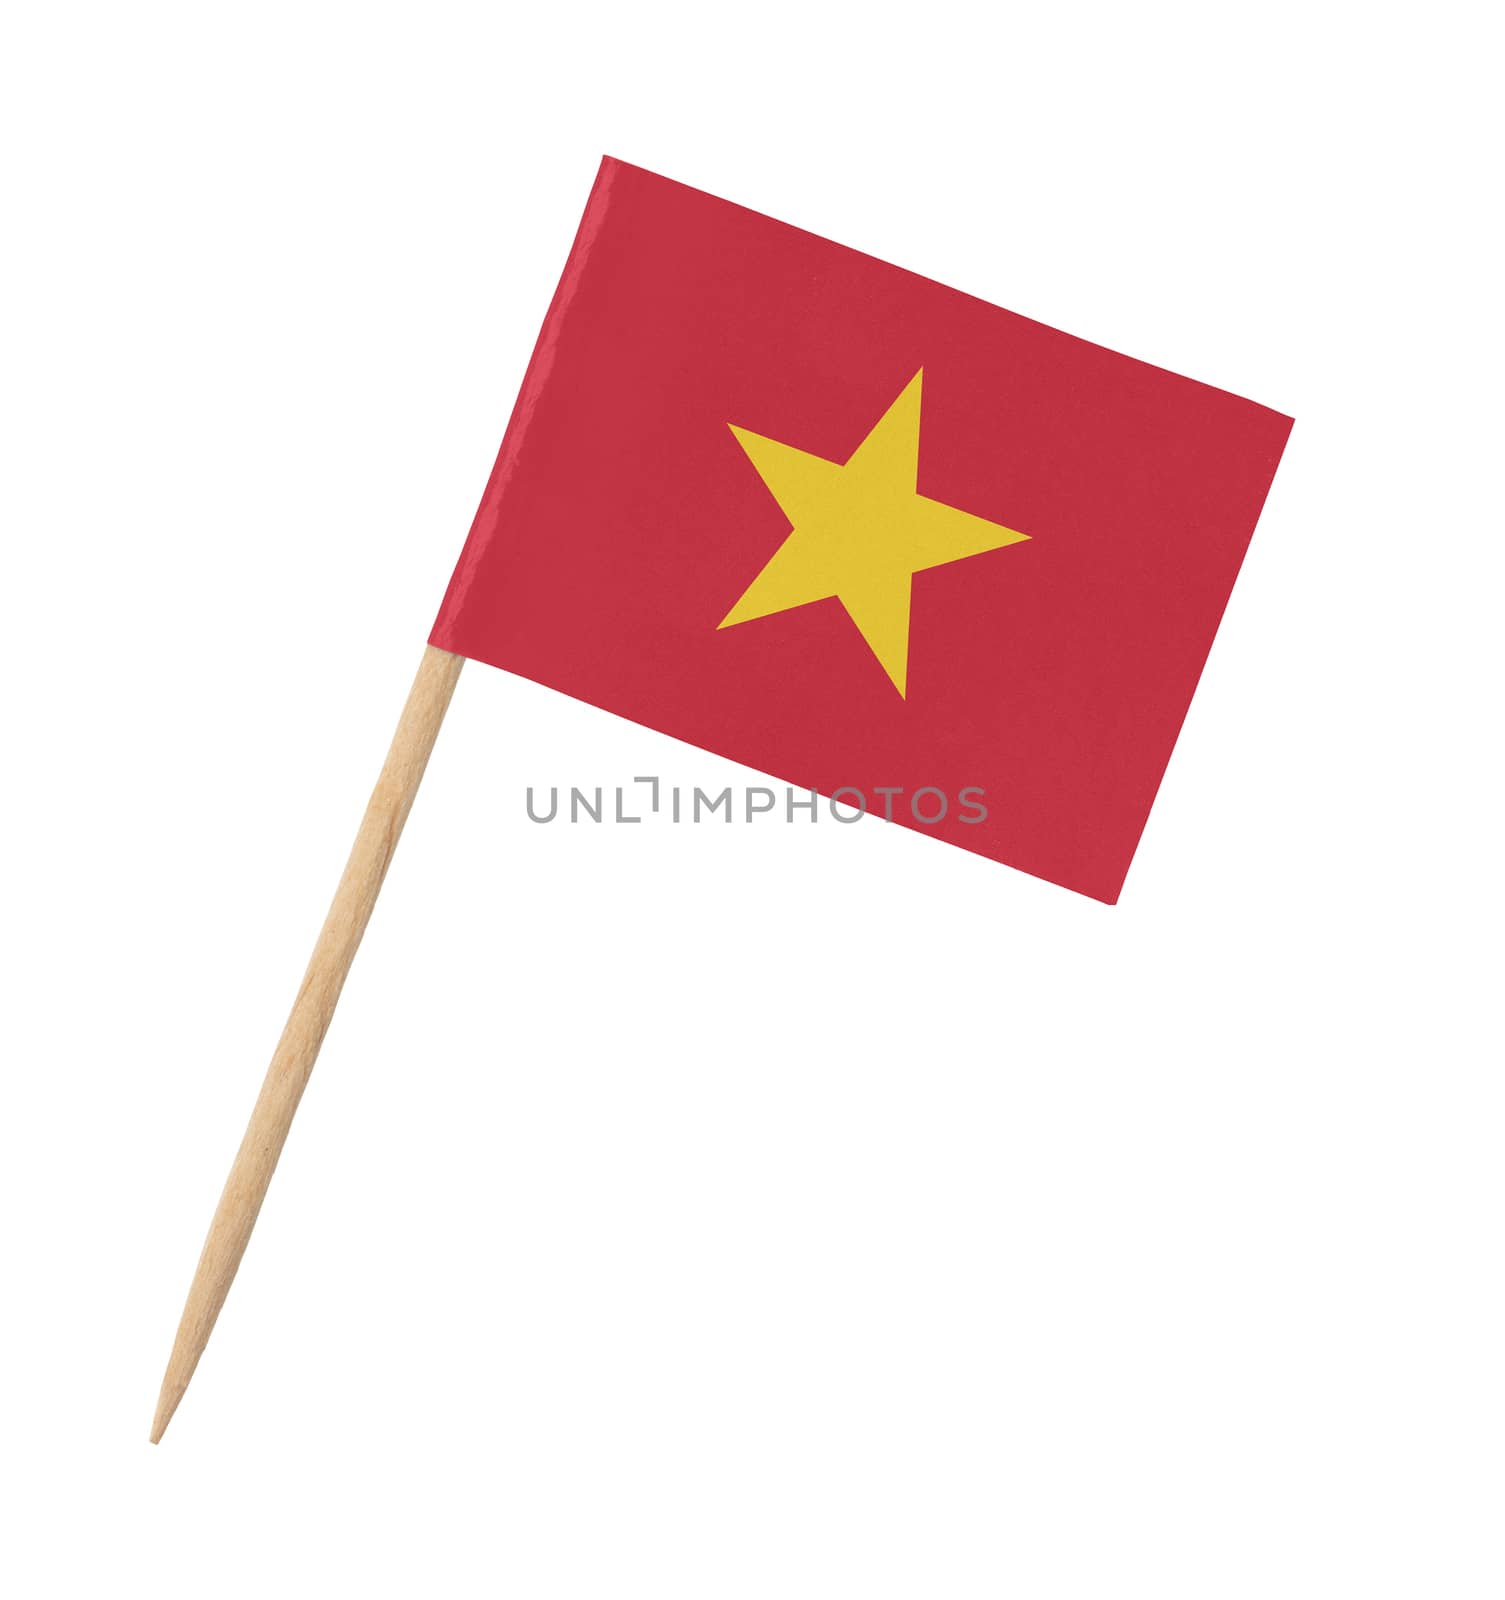 Small paper Vietnamese flag on wooden stick, isolated on white